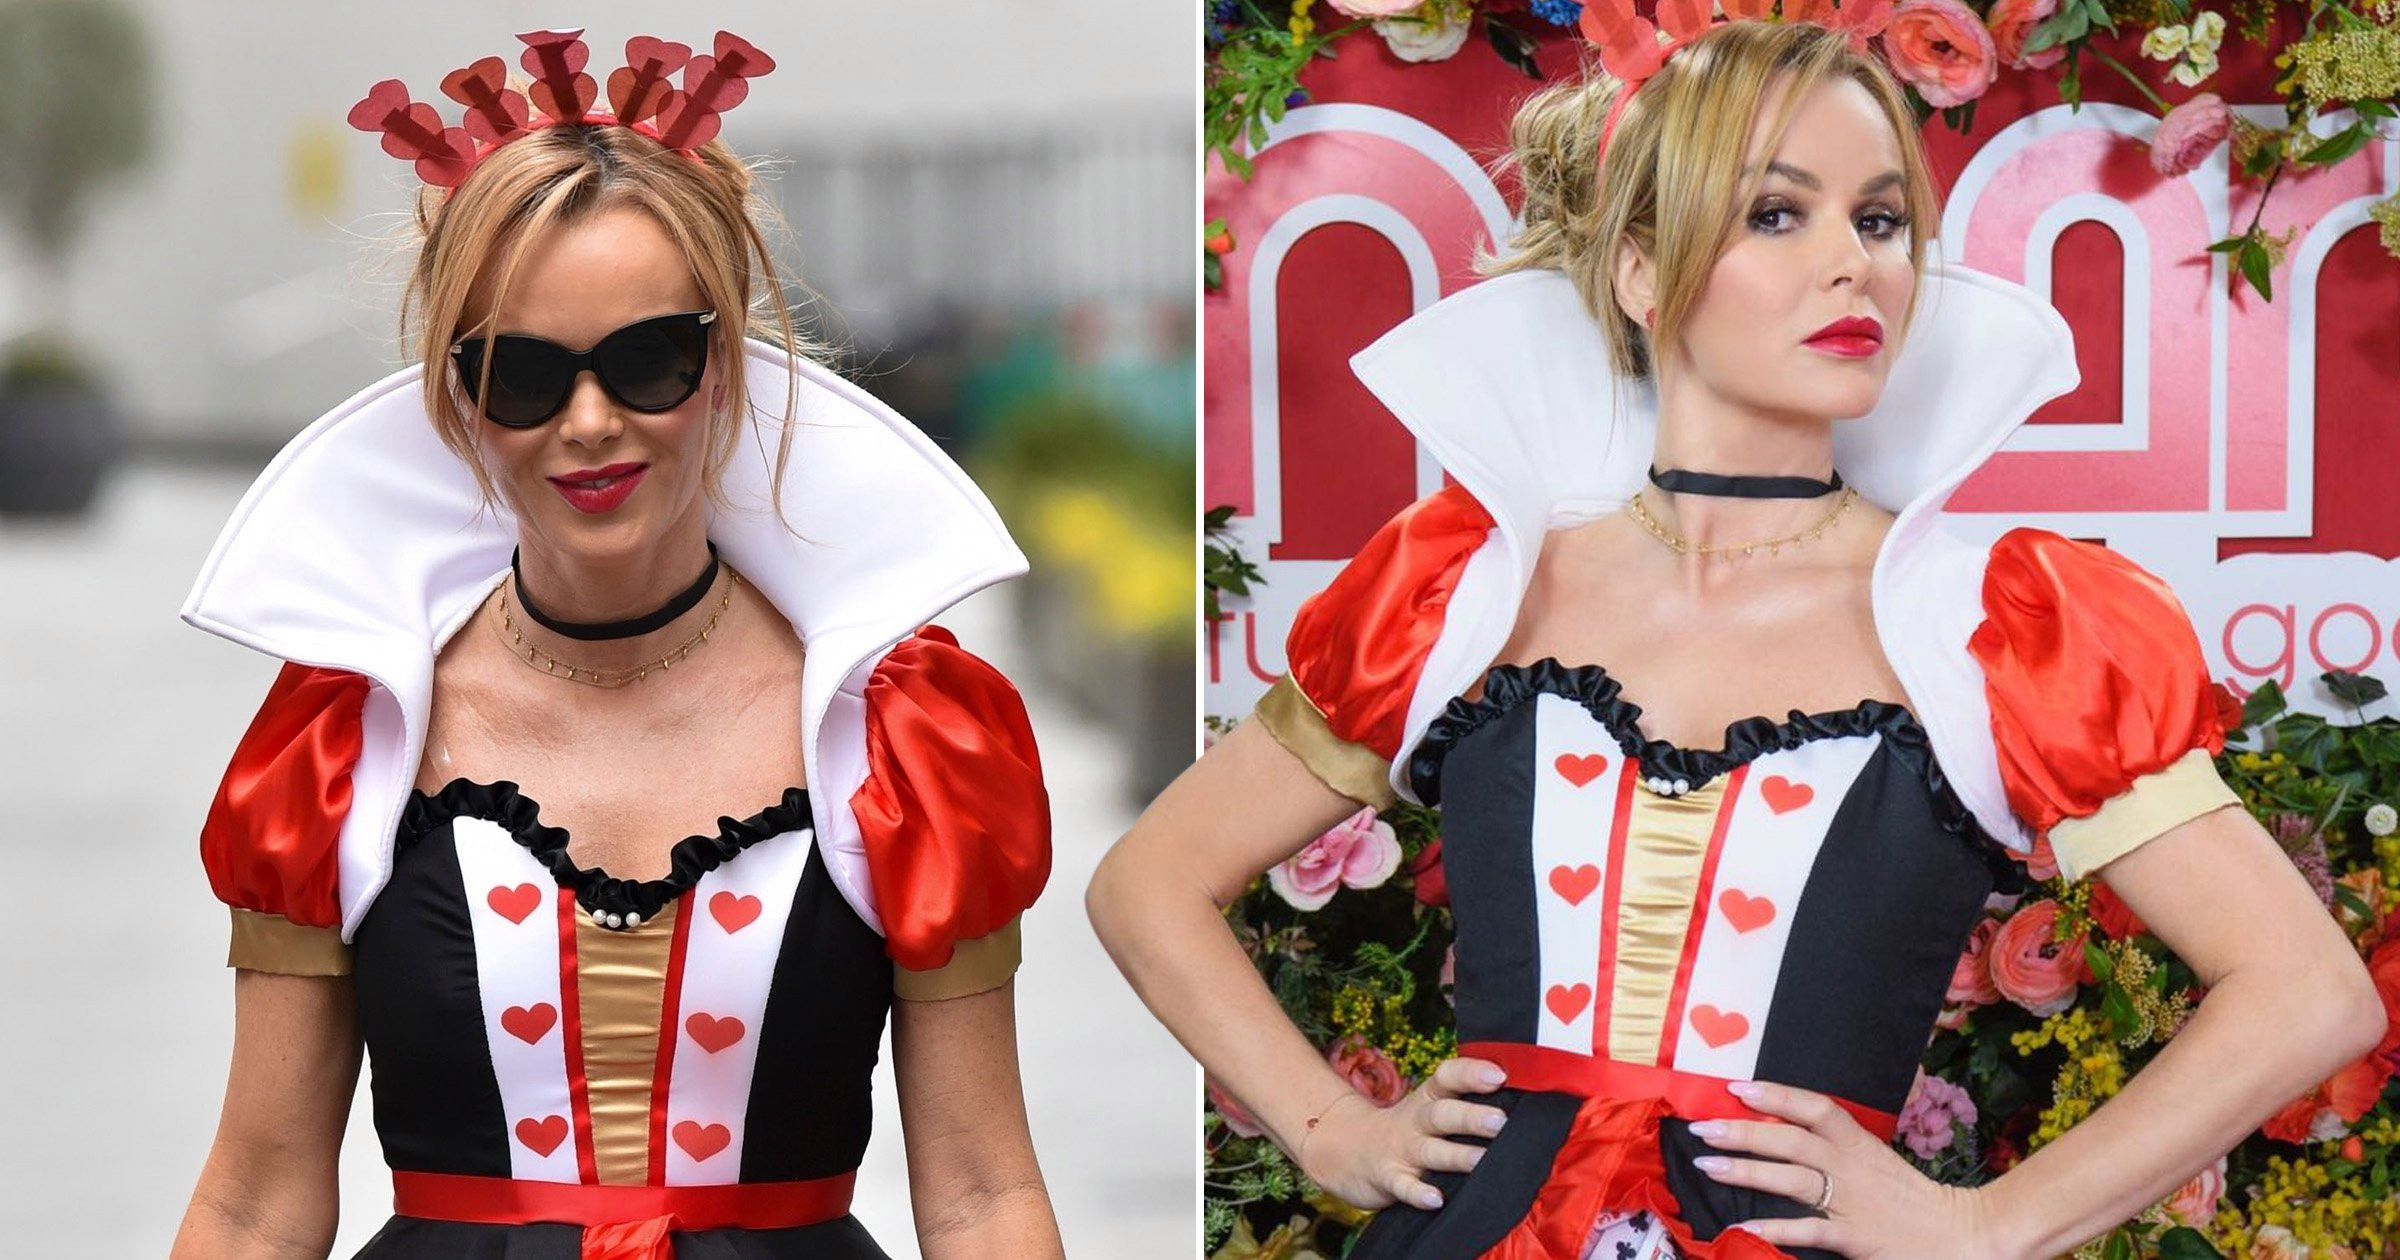 Amanda Holden is the queen of all our hearts as she slays fancy dress for World Book Day